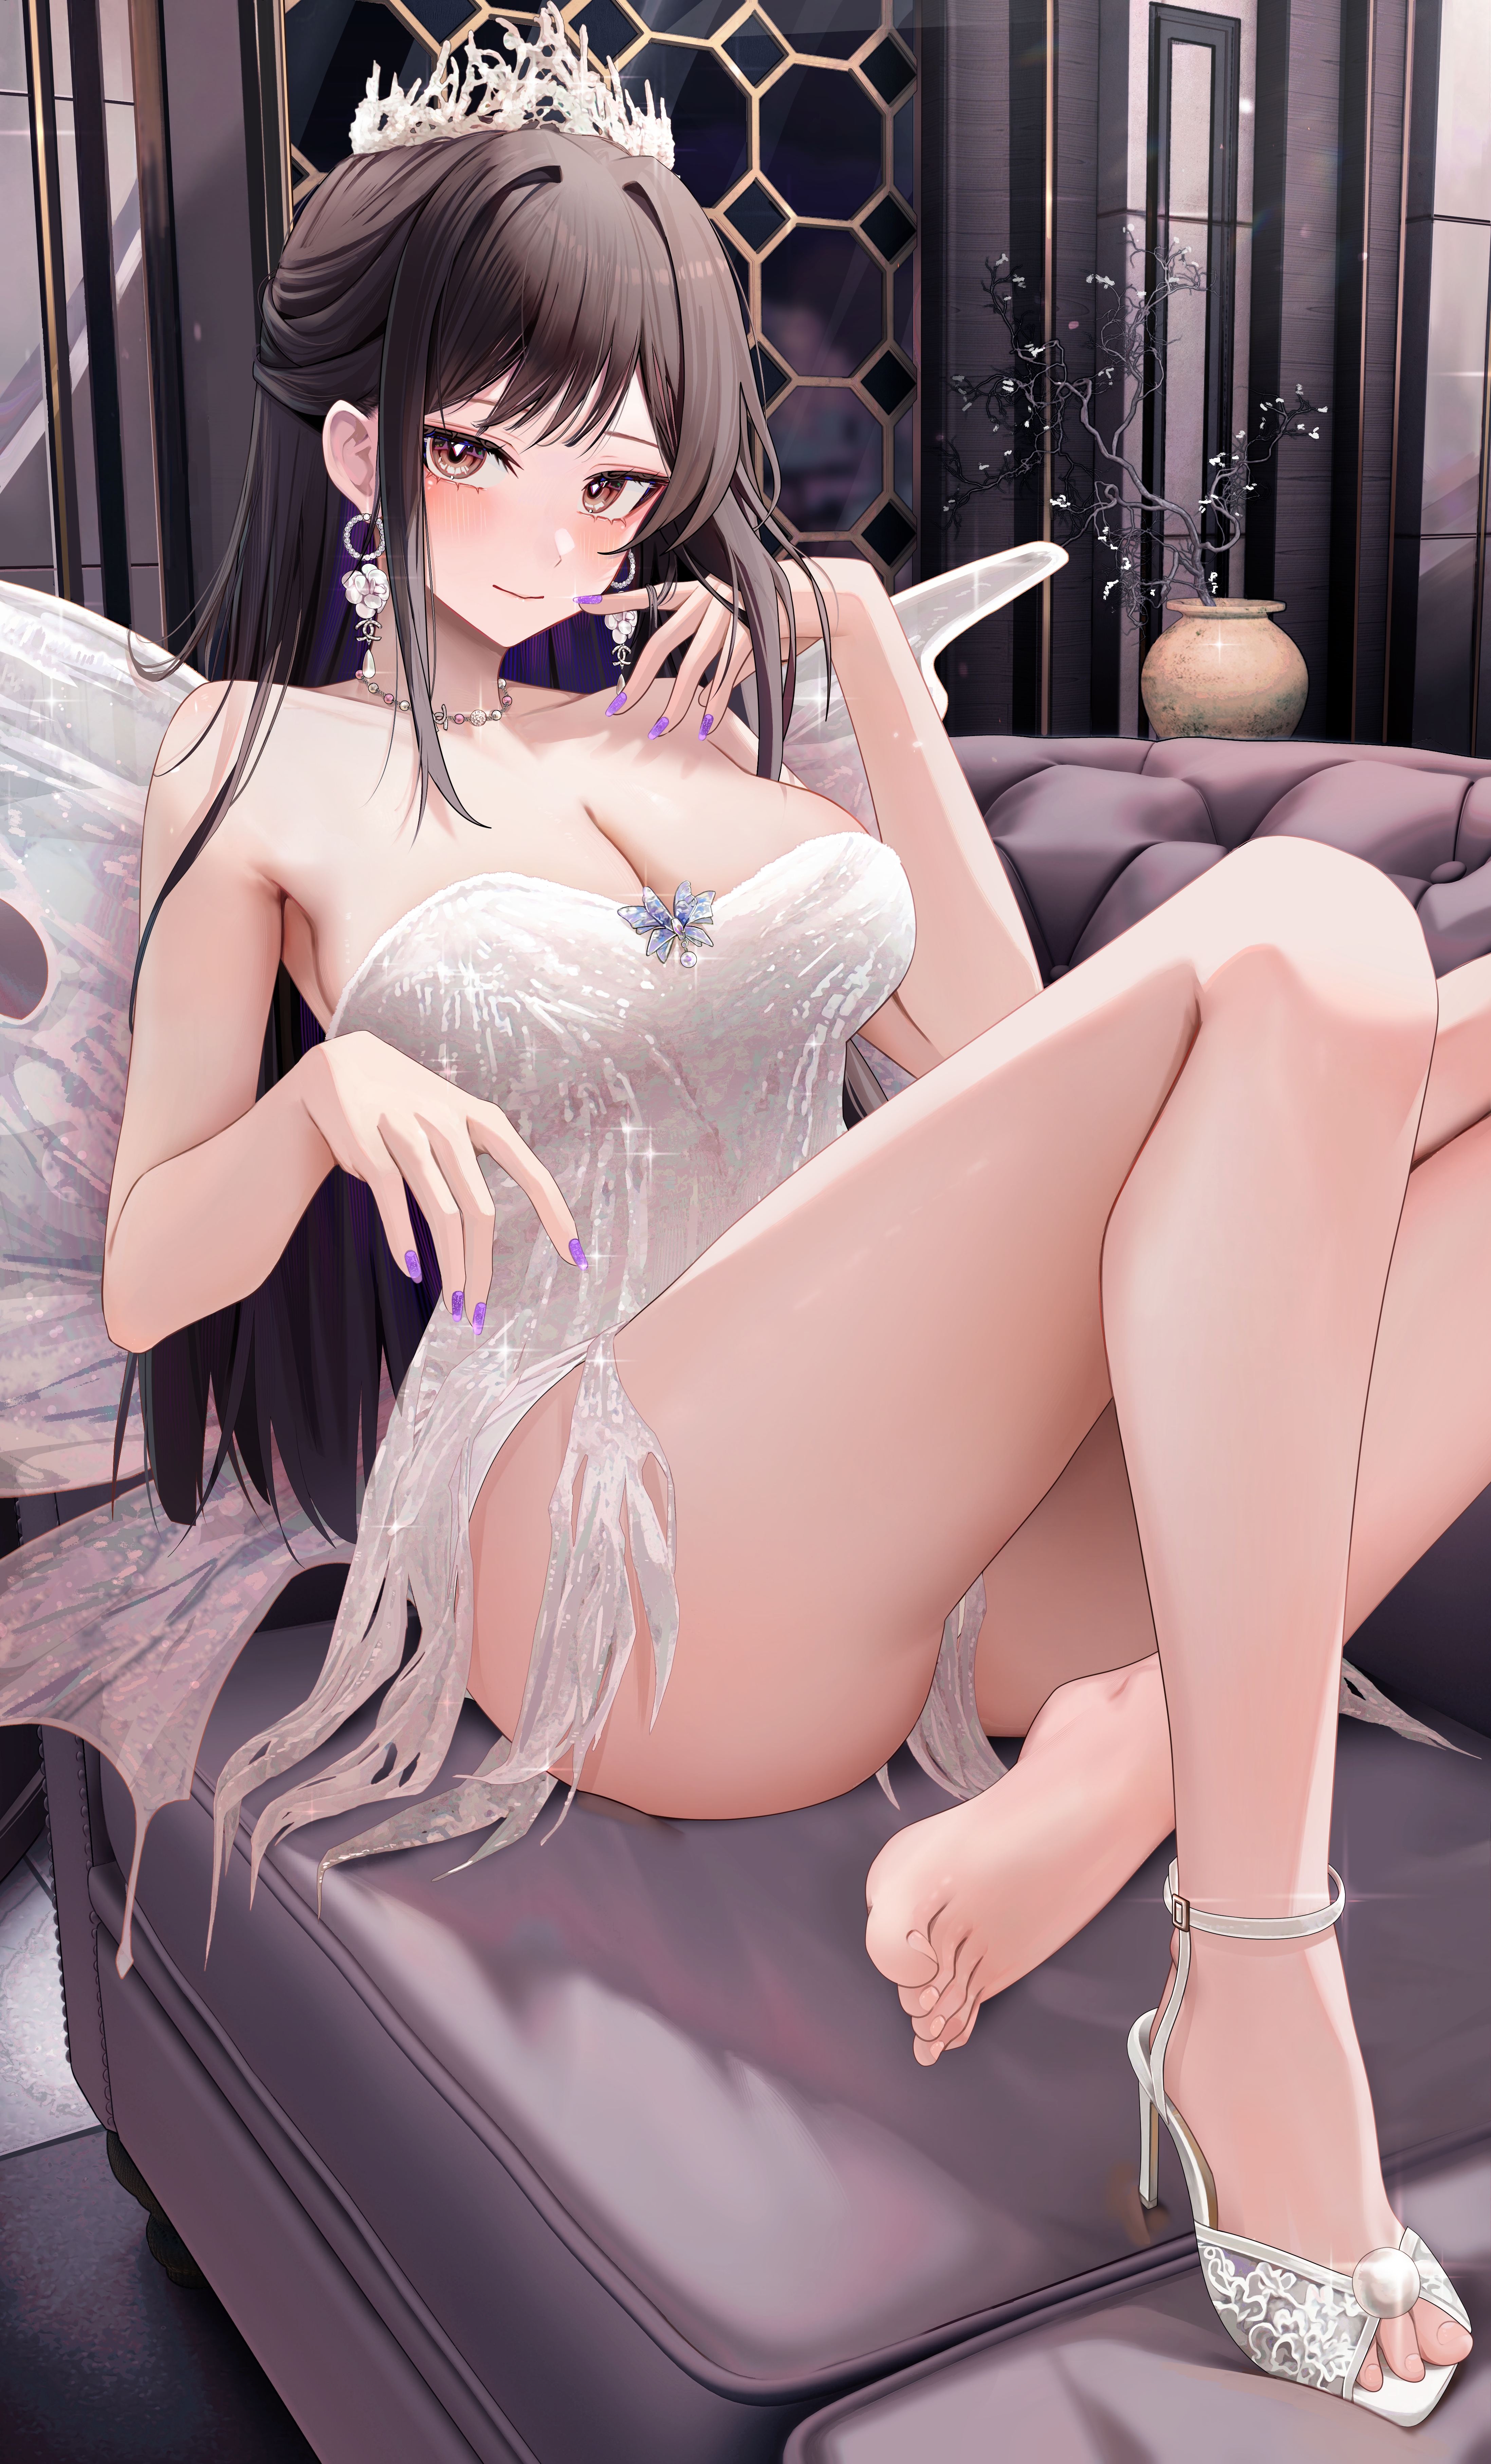 Anime 4392x7260 Ru Zhai anime girls heels looking at viewer portrait display feet big boobs dress smiling long hair sitting earring necklace brown eyes brunette blushing purple nails couch fan art cleavage jewelry barefoot pointed toes bent legs painted nails white dress